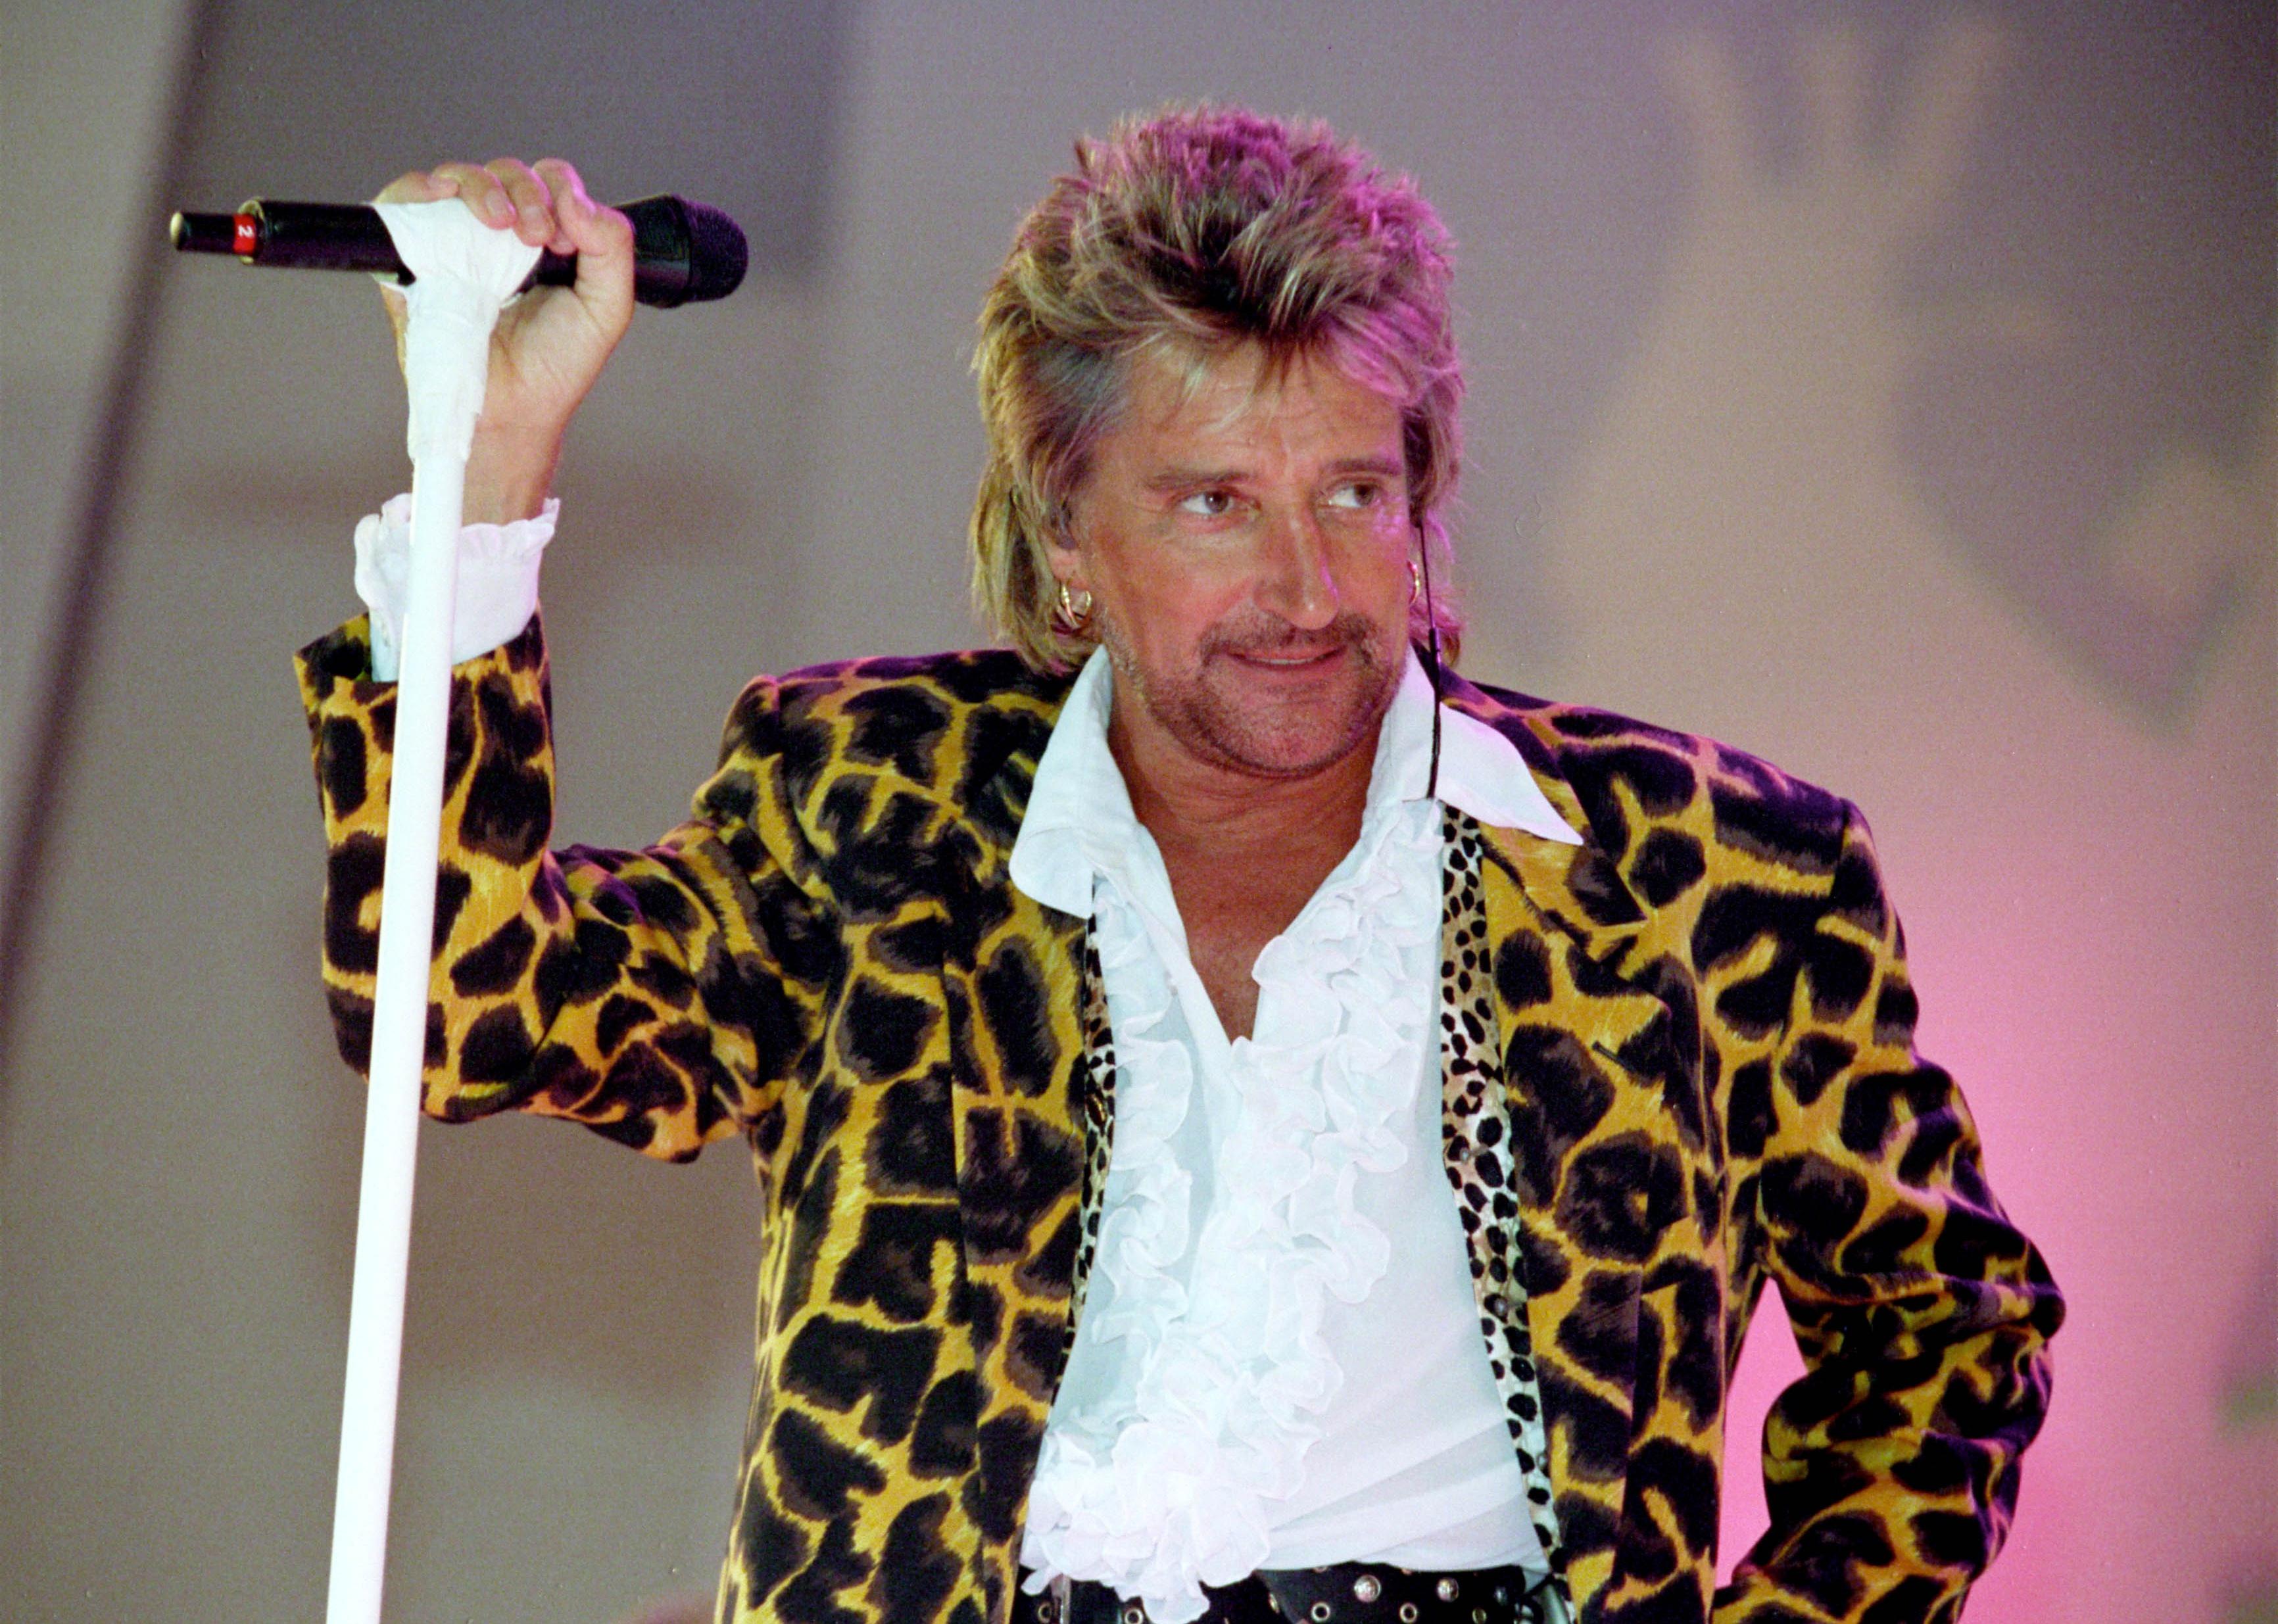 <p>Rod Stewart celebrated New Year's Eve with this free open-air concert, which <a href="https://www.guinnessworldrecords.com/world-records/73085-largest-free-rock-concert-attendance">drew a record-breaking crowd</a> of over 3.5 million people. It made up part of his A Night To Remember Tour and <a href="https://www.seatunique.com/blog/rod-stewarts-best-ever-setlists/">featured hit songs</a> such as "Maggie May" and "Do Ya Think I'm Sexy."</p>